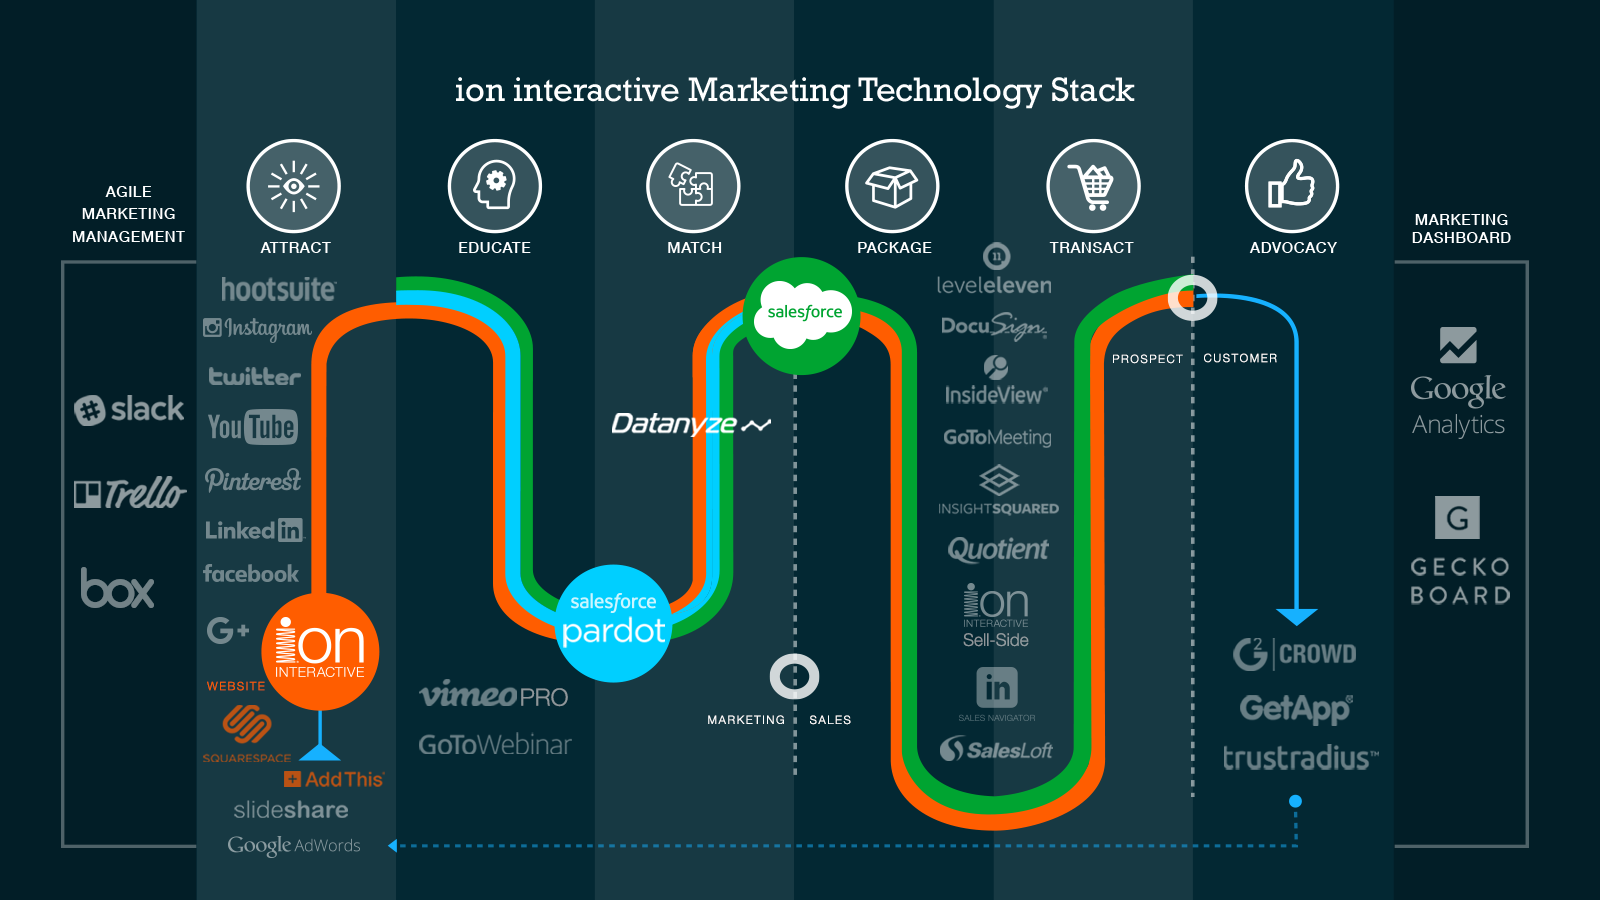 Example of a Marketing Technology Stack by ion interactive